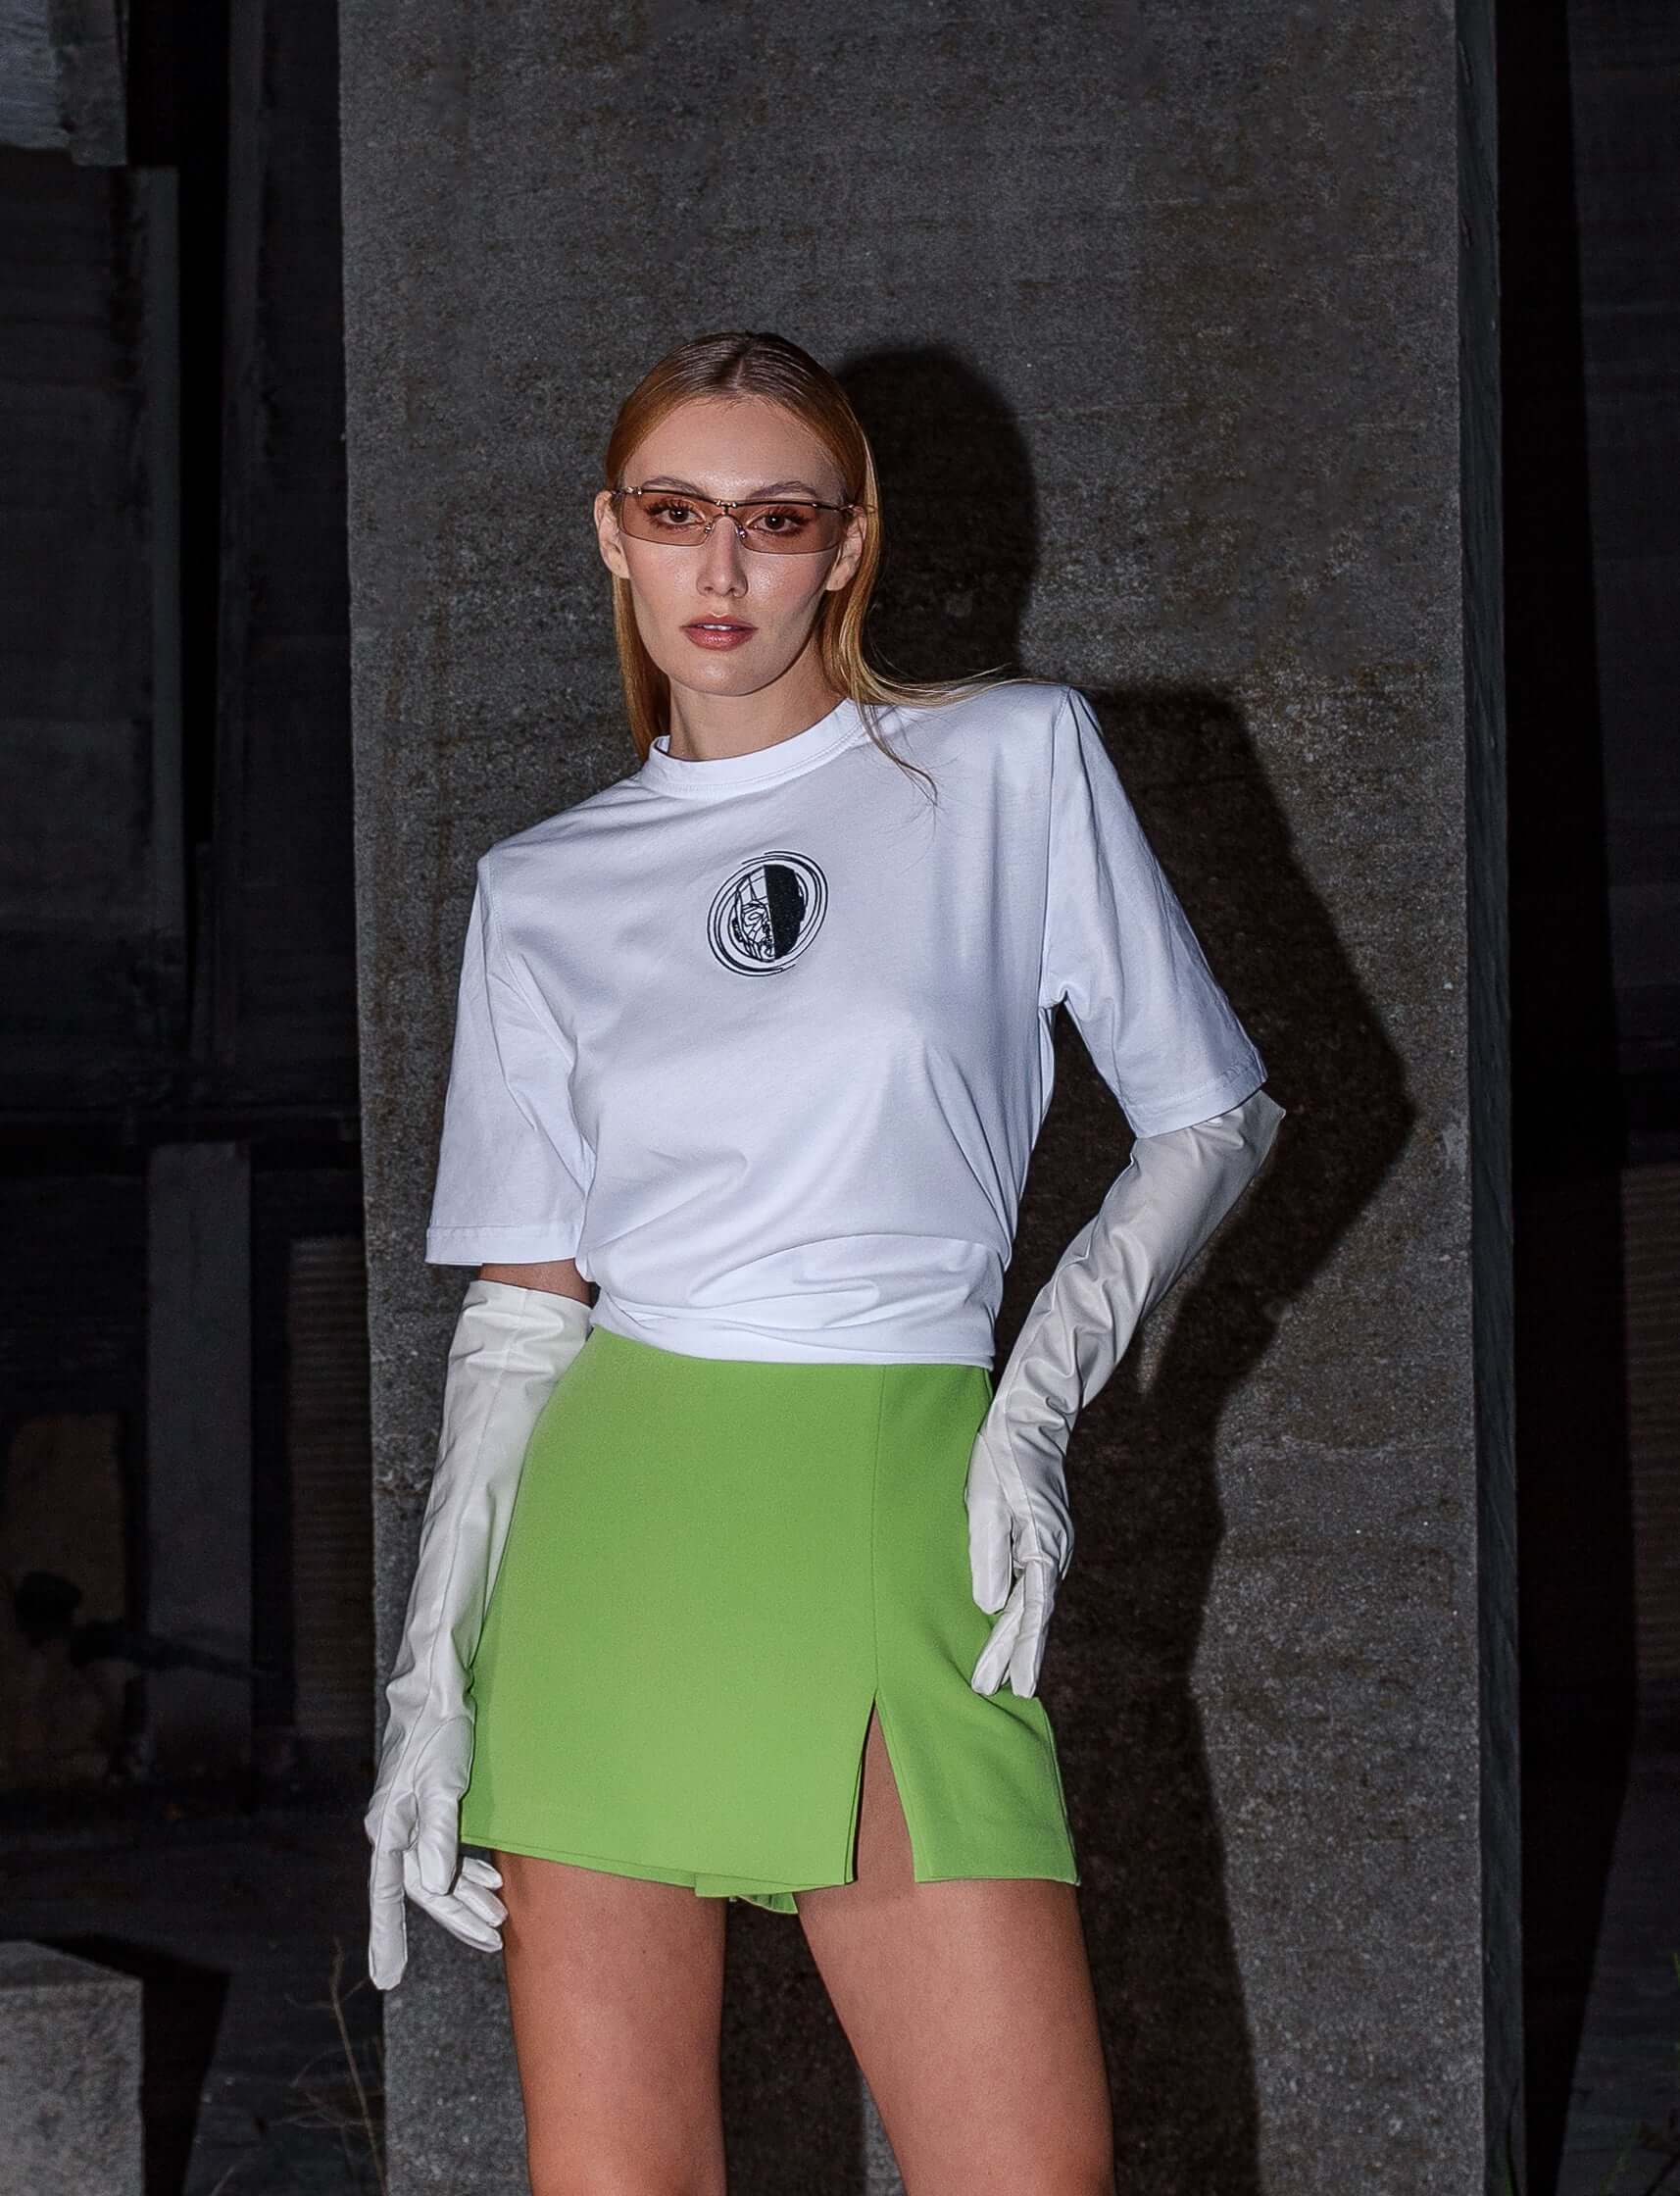 The model wears a white, oversized silhouette t-shirt with face embroidery in black. The outfit also contains a short skirt, boots and sunglasses, complimenting the white t-shirt with face embroidery. The footwear is not visible in this photograph. An editorial photograph in an architectural monument in Plovdiv, Bulgaria.